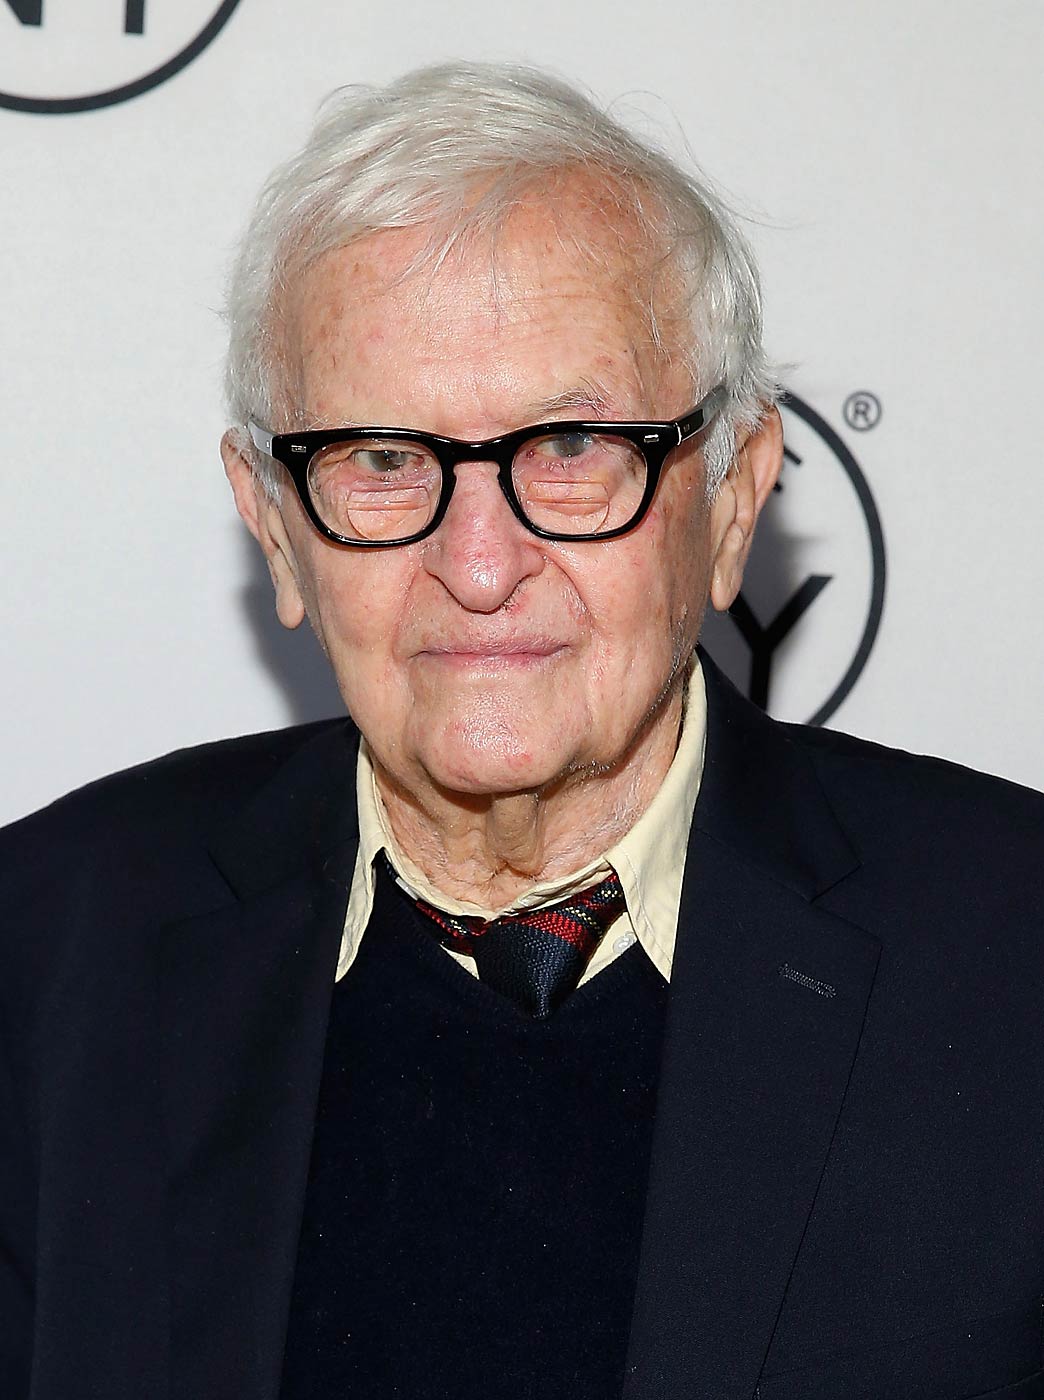 Albert Maysles attends the "Made In NY" Awards Ceremony at Weylin B. Seymour's on Nov. 10, 2014 in Brooklyn, New York. (John Lamparski—WireImage/Getty Images)